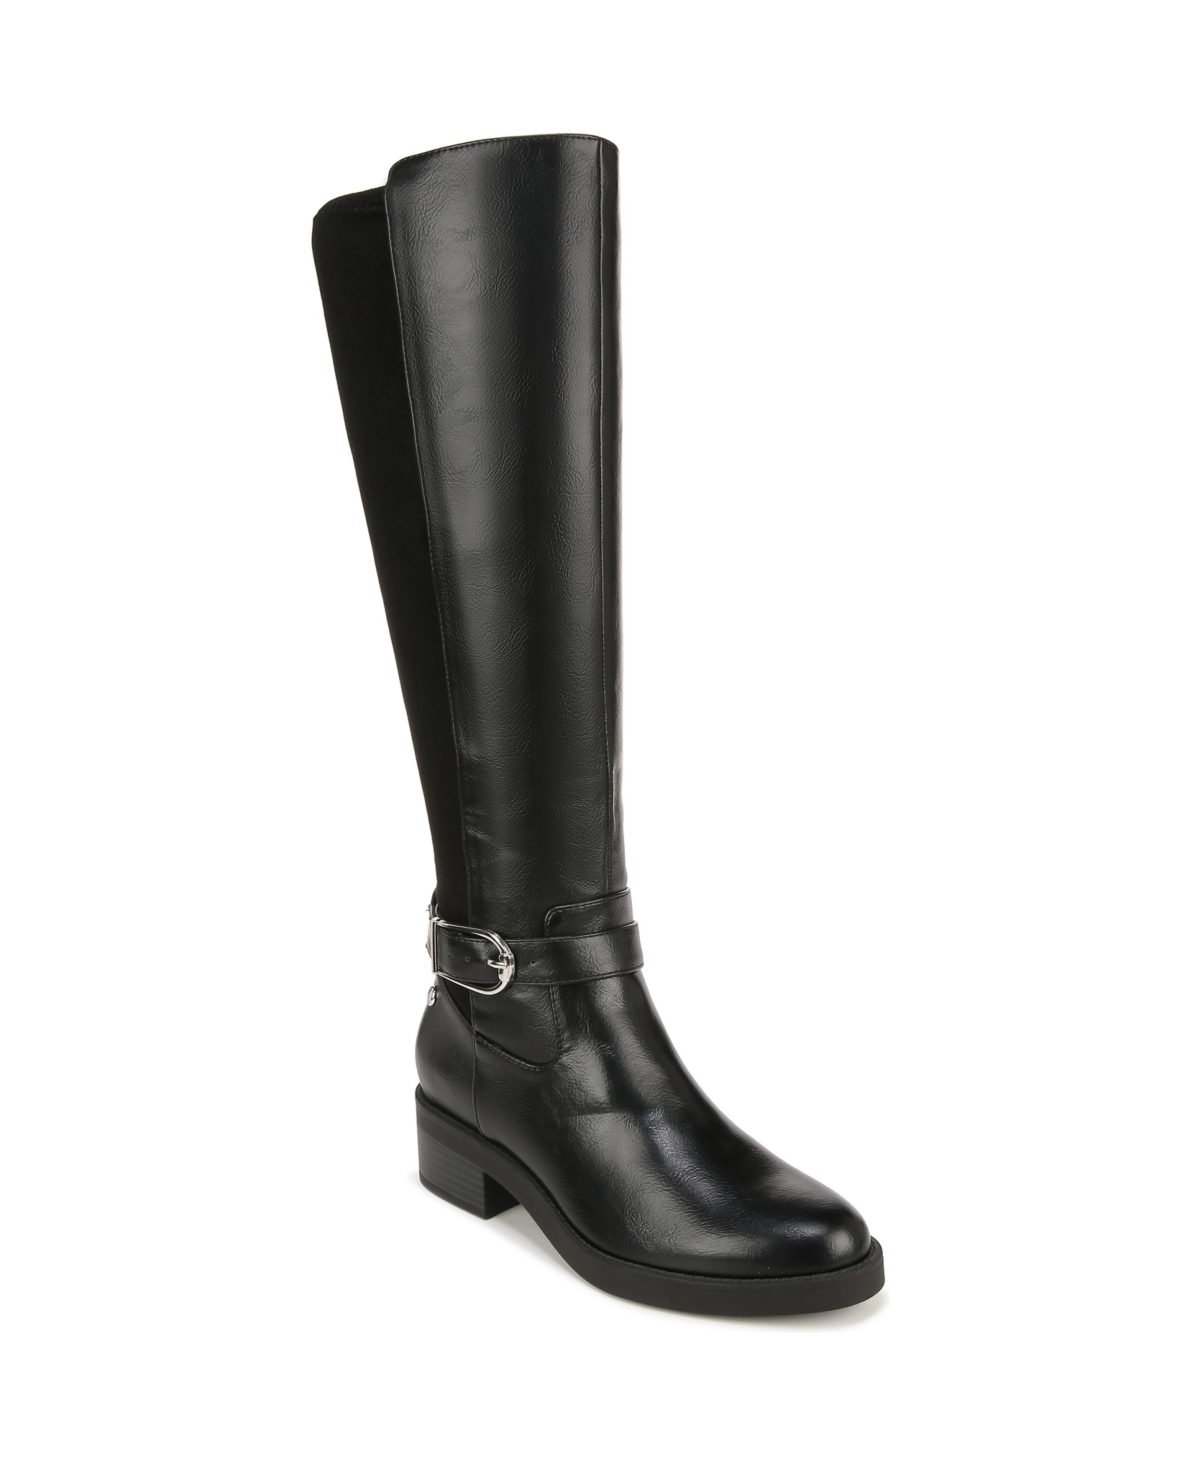 Brooks Knee High Boots - Black Faux Leather/Microsuede